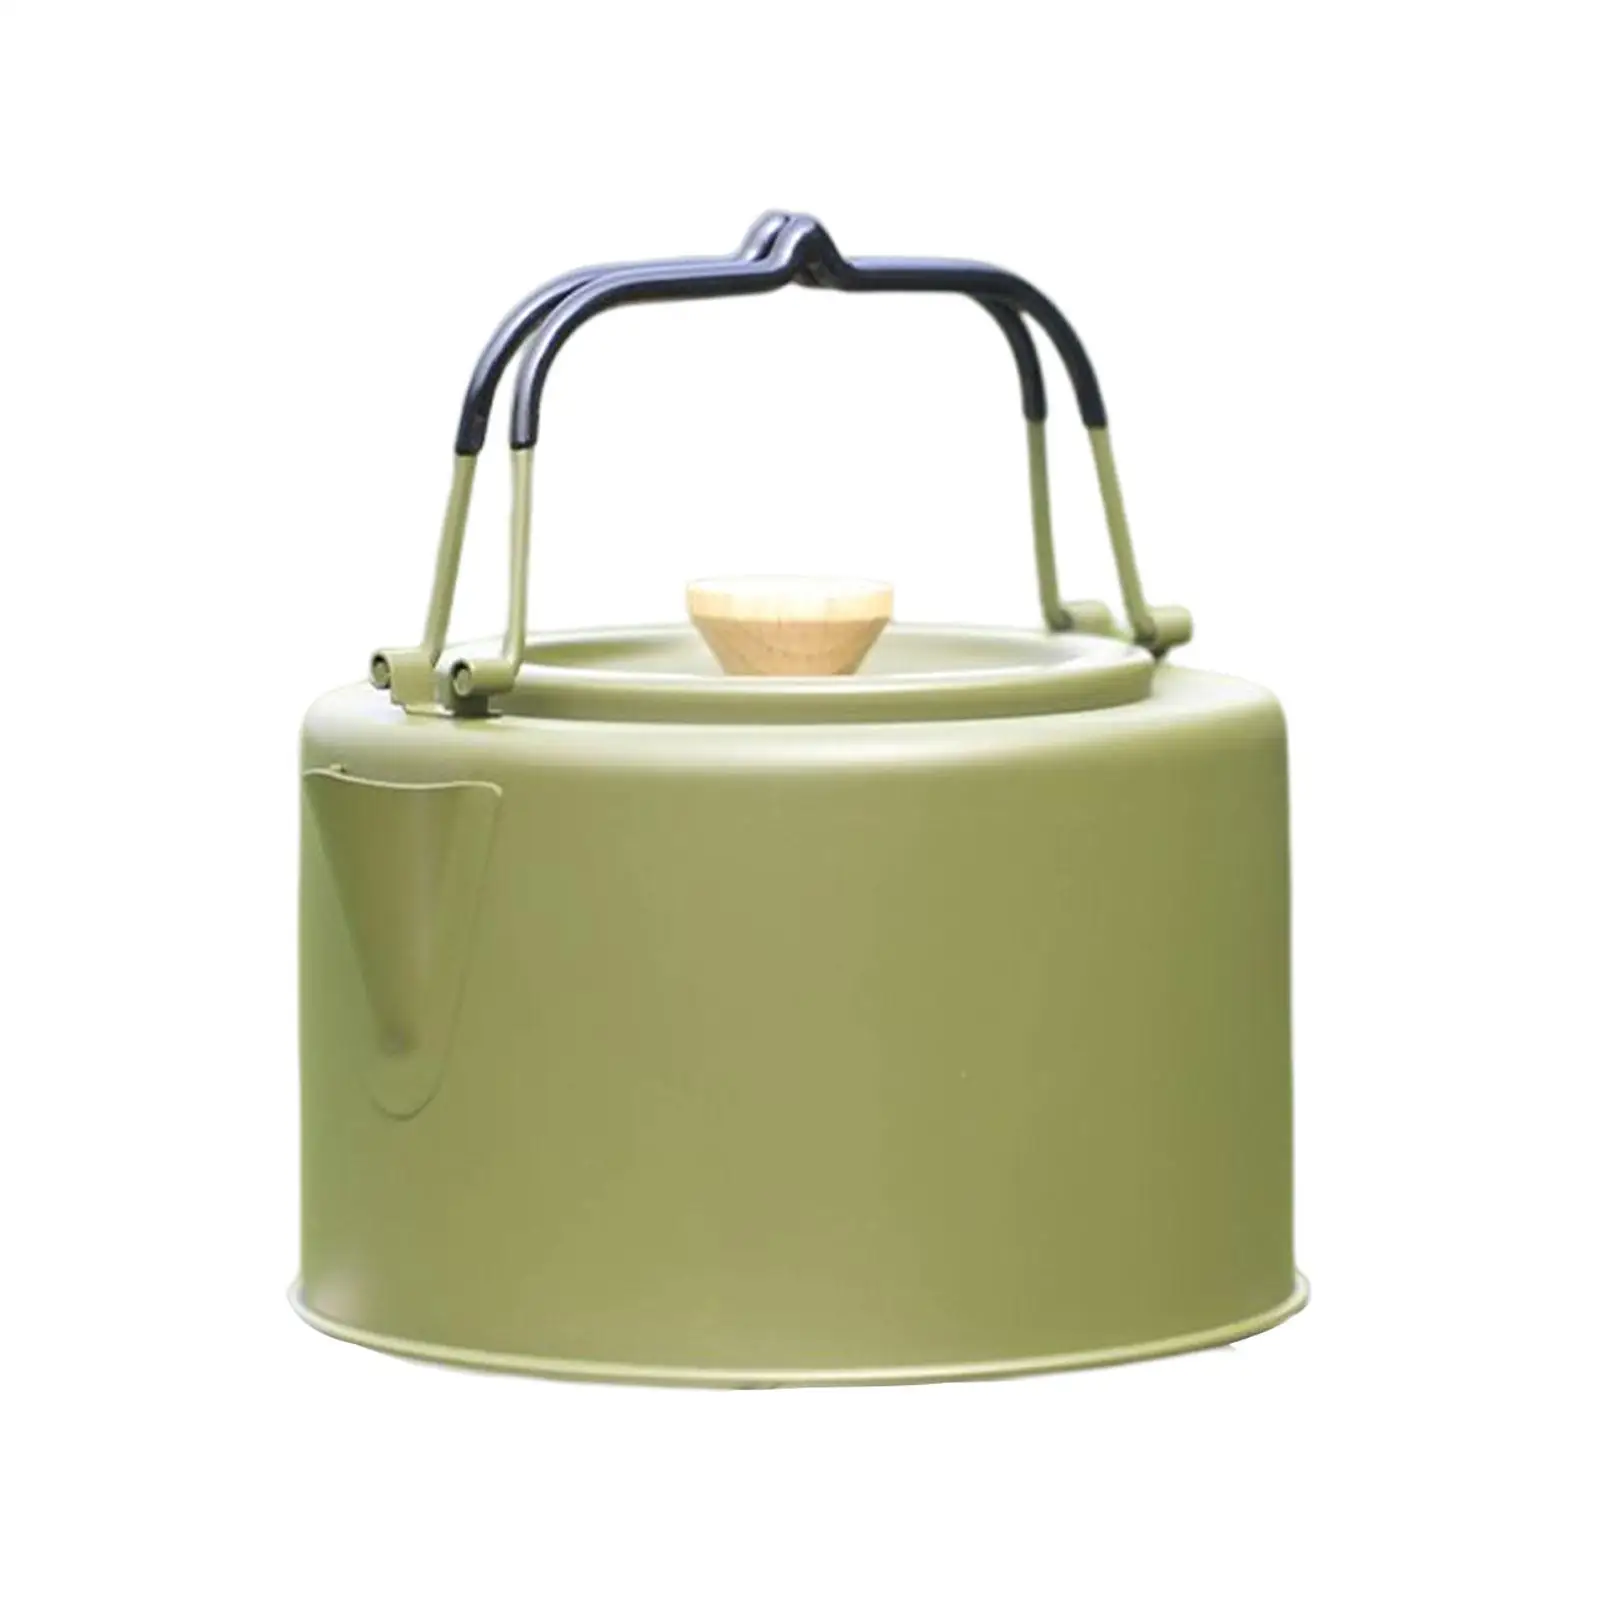 Stainless Steel Camping Tea Kettle Camp Tea Pot with Lid 1L Kettle Outdoor Kettle for Outdoor